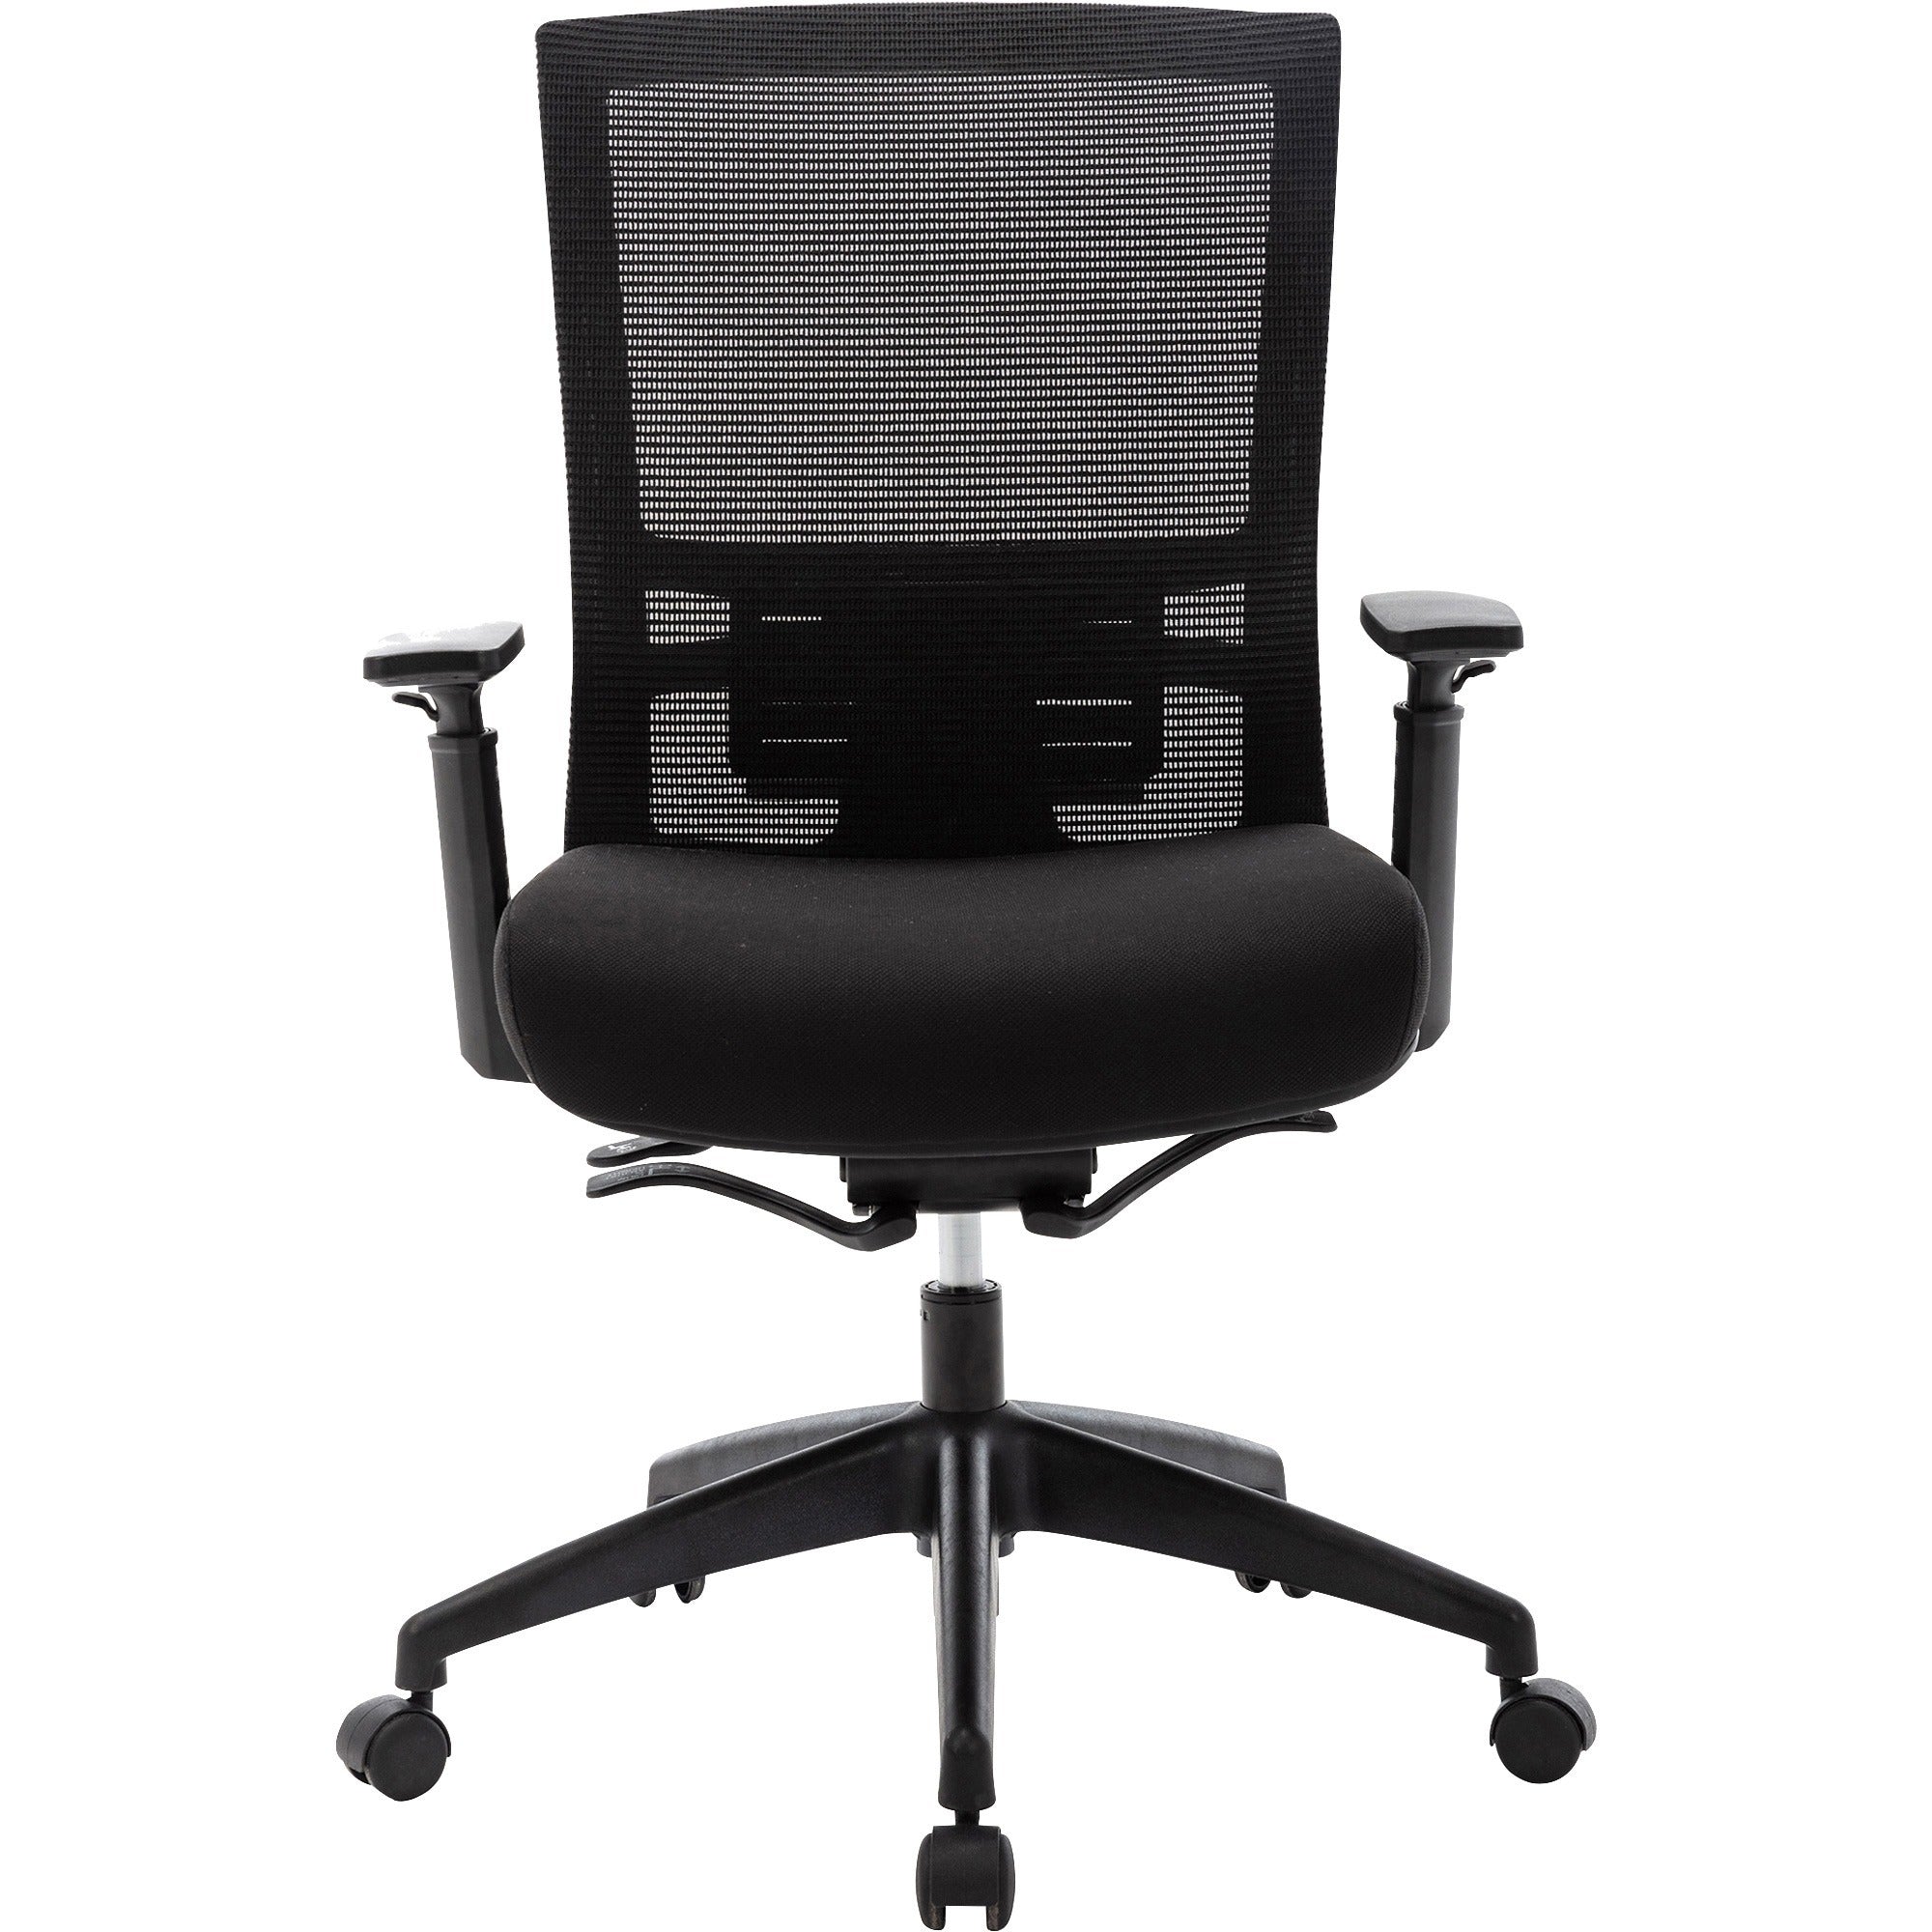 lorell-mesh-mid-back-office-chair-fabric-seat-mid-back-5-star-base-black-1-each_llr62626 - 3